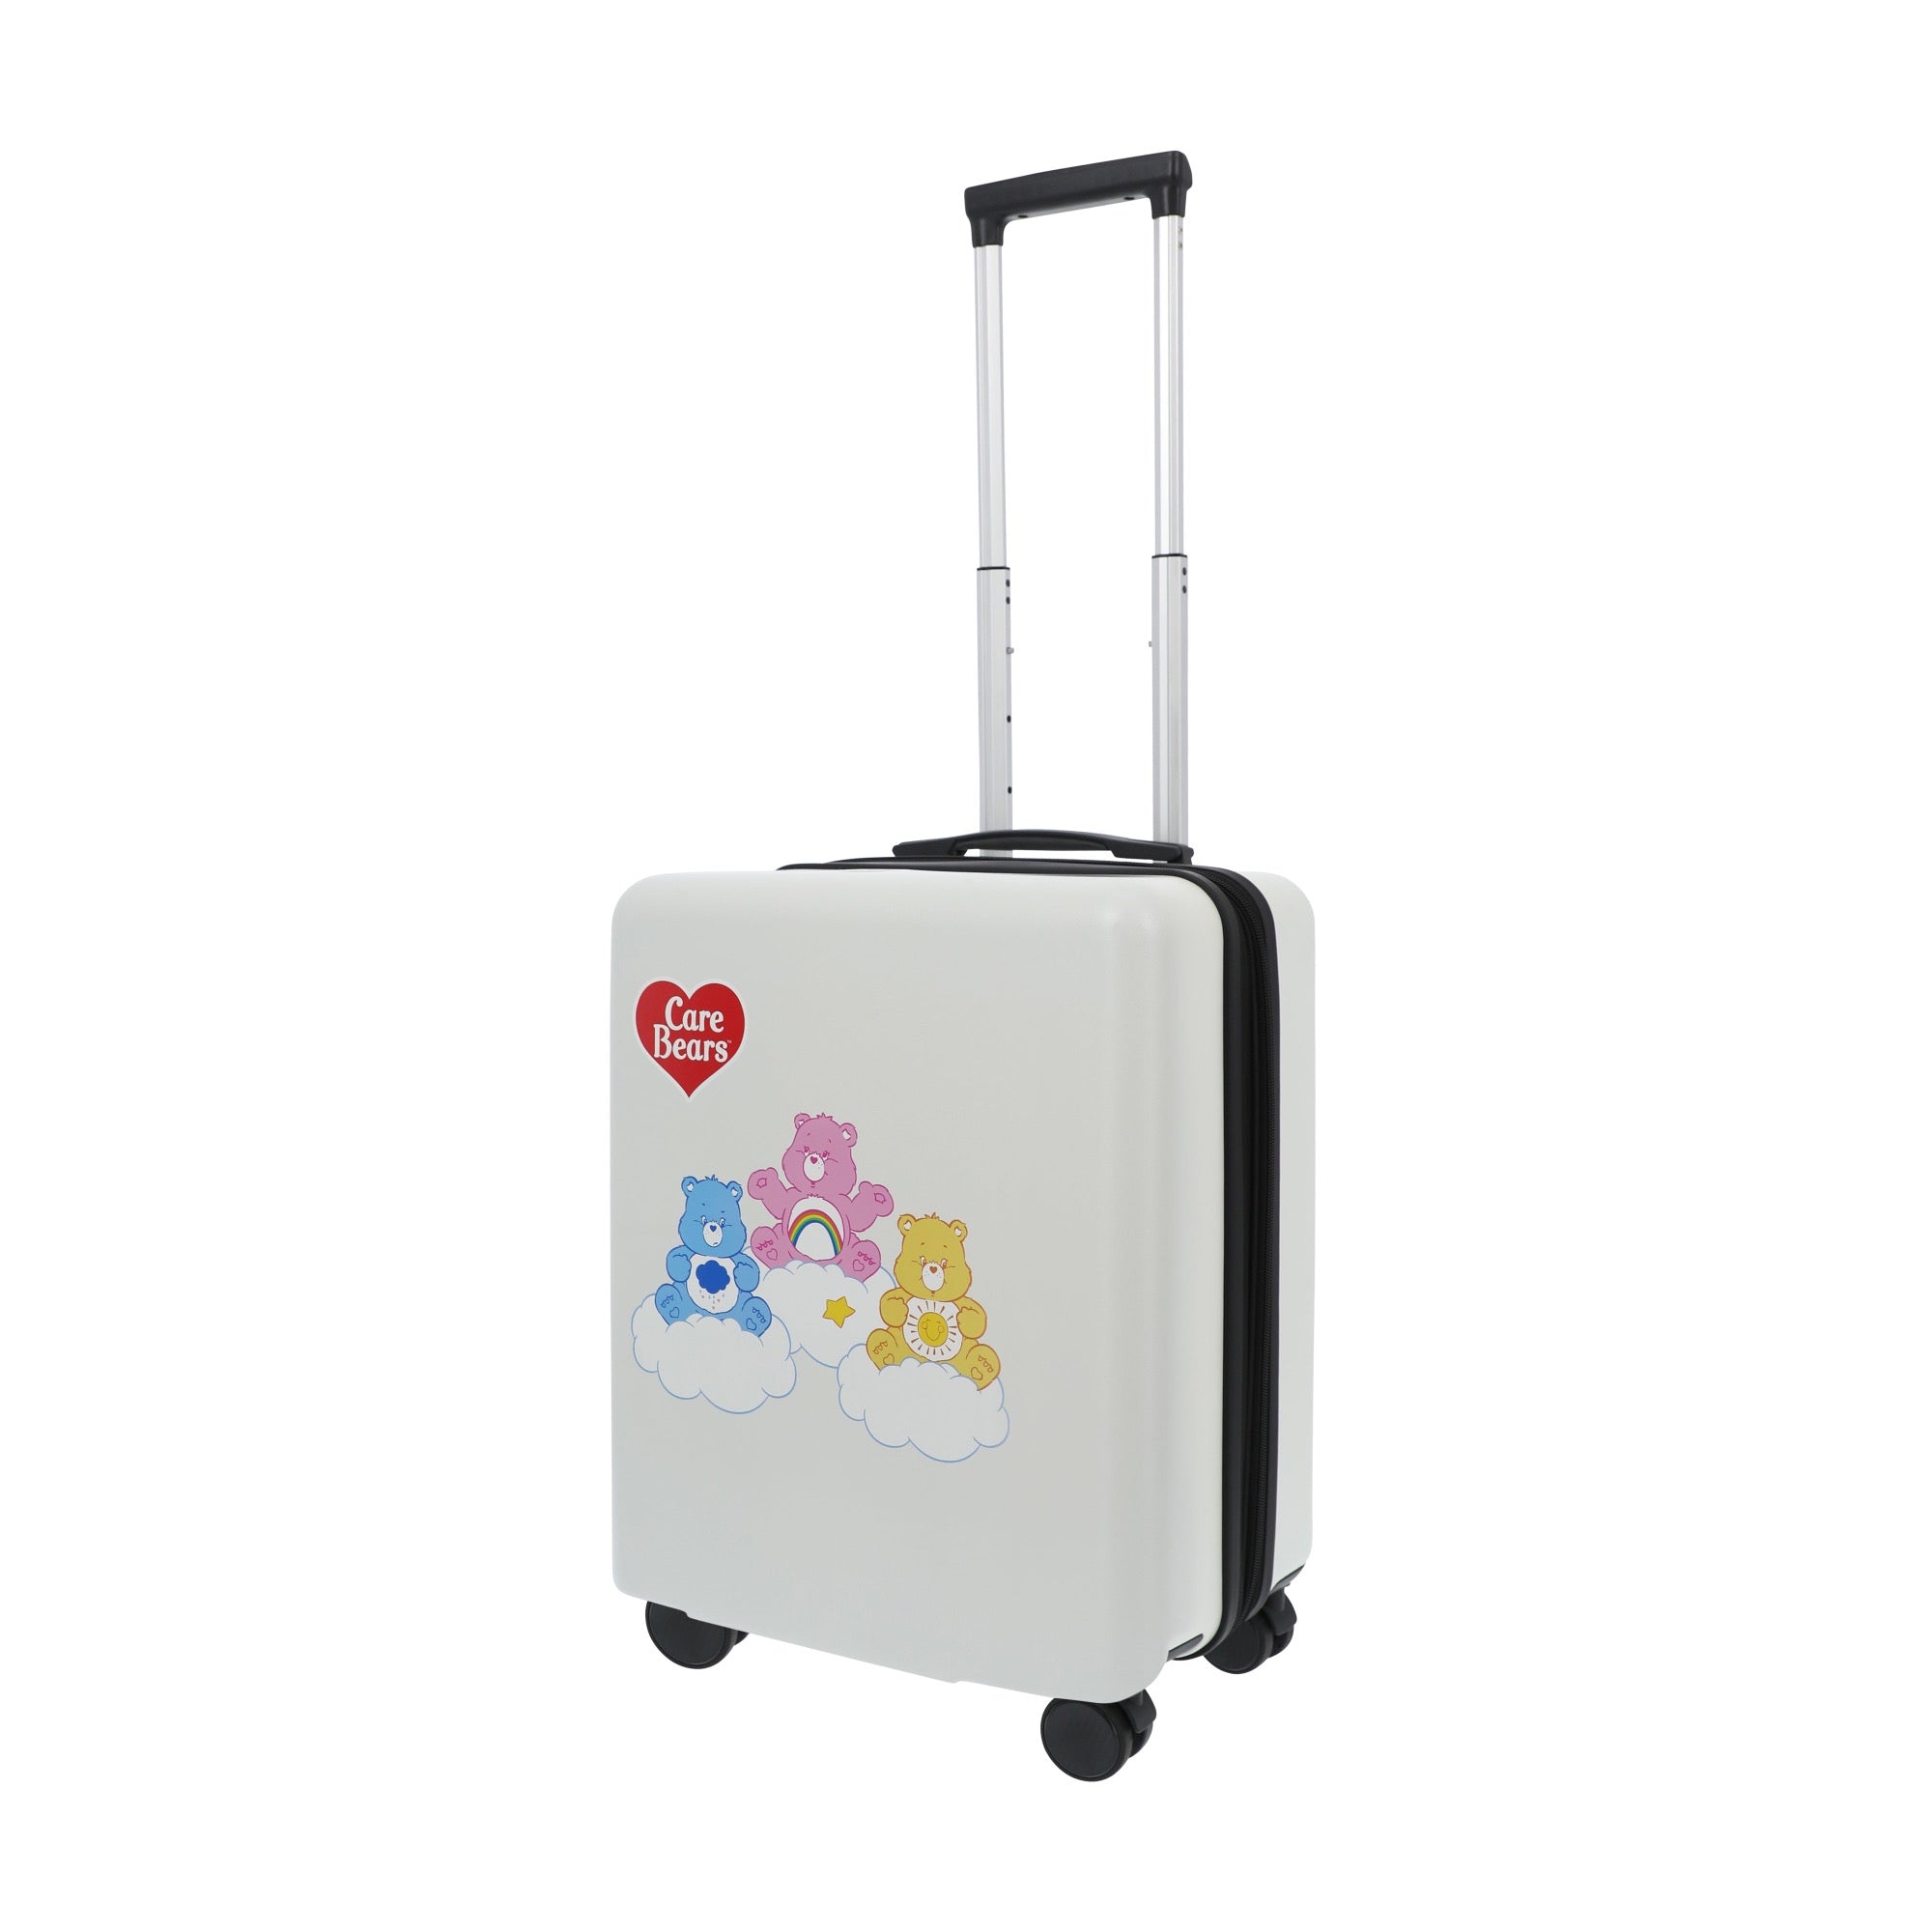 White cloudco care bears 22.5" carry-on spinner suitcase luggage by Ful